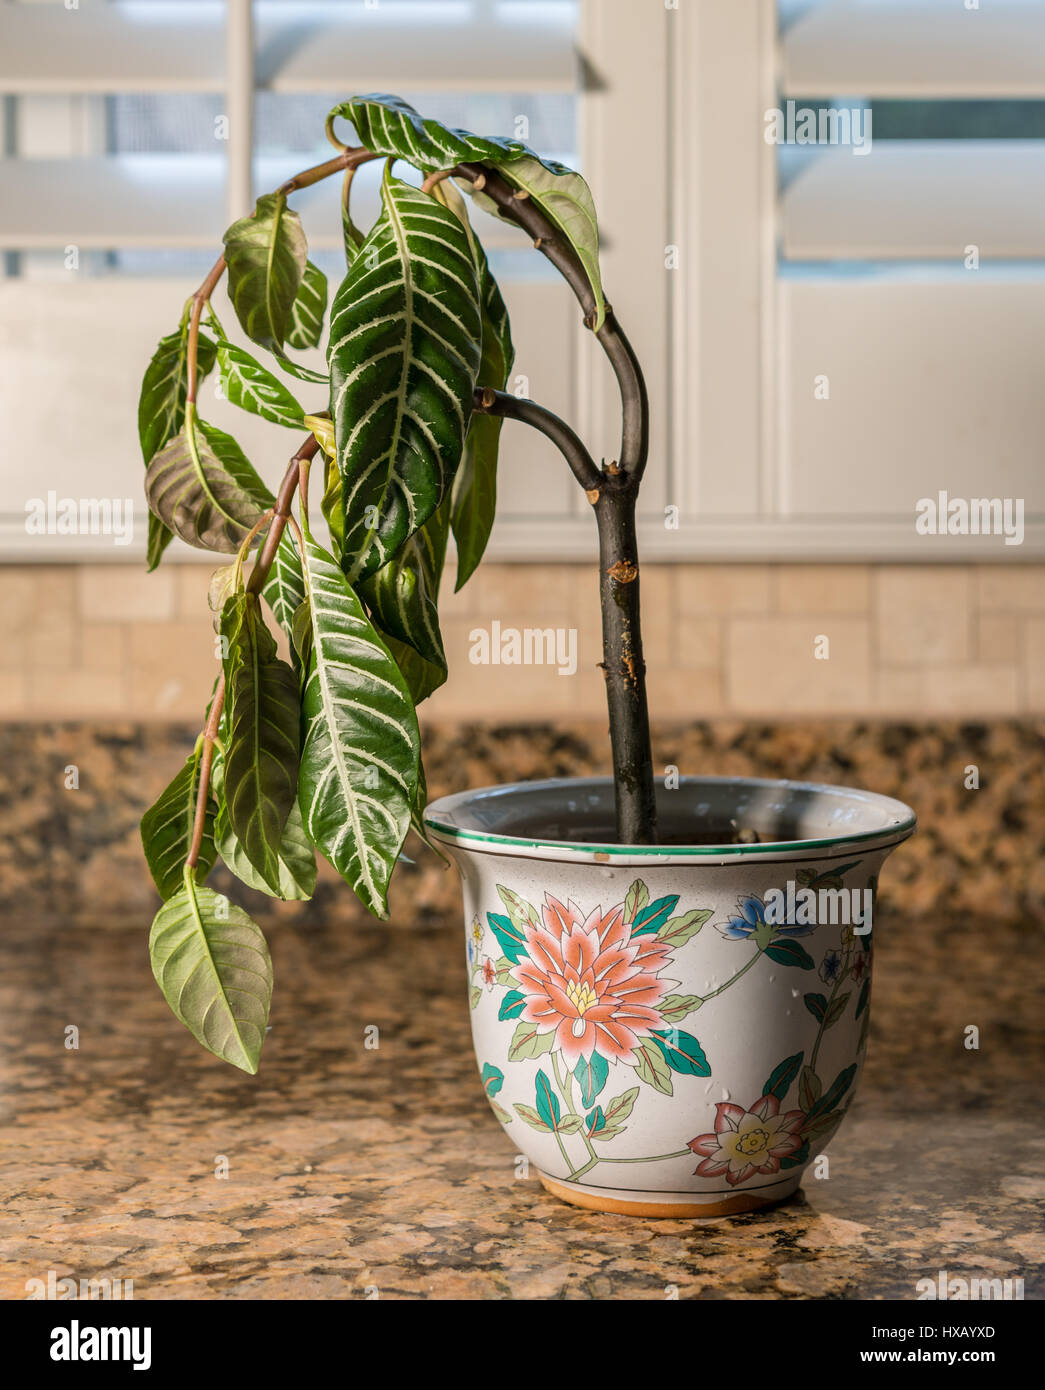 Drooping houseplant in pottery vase Stock Photo